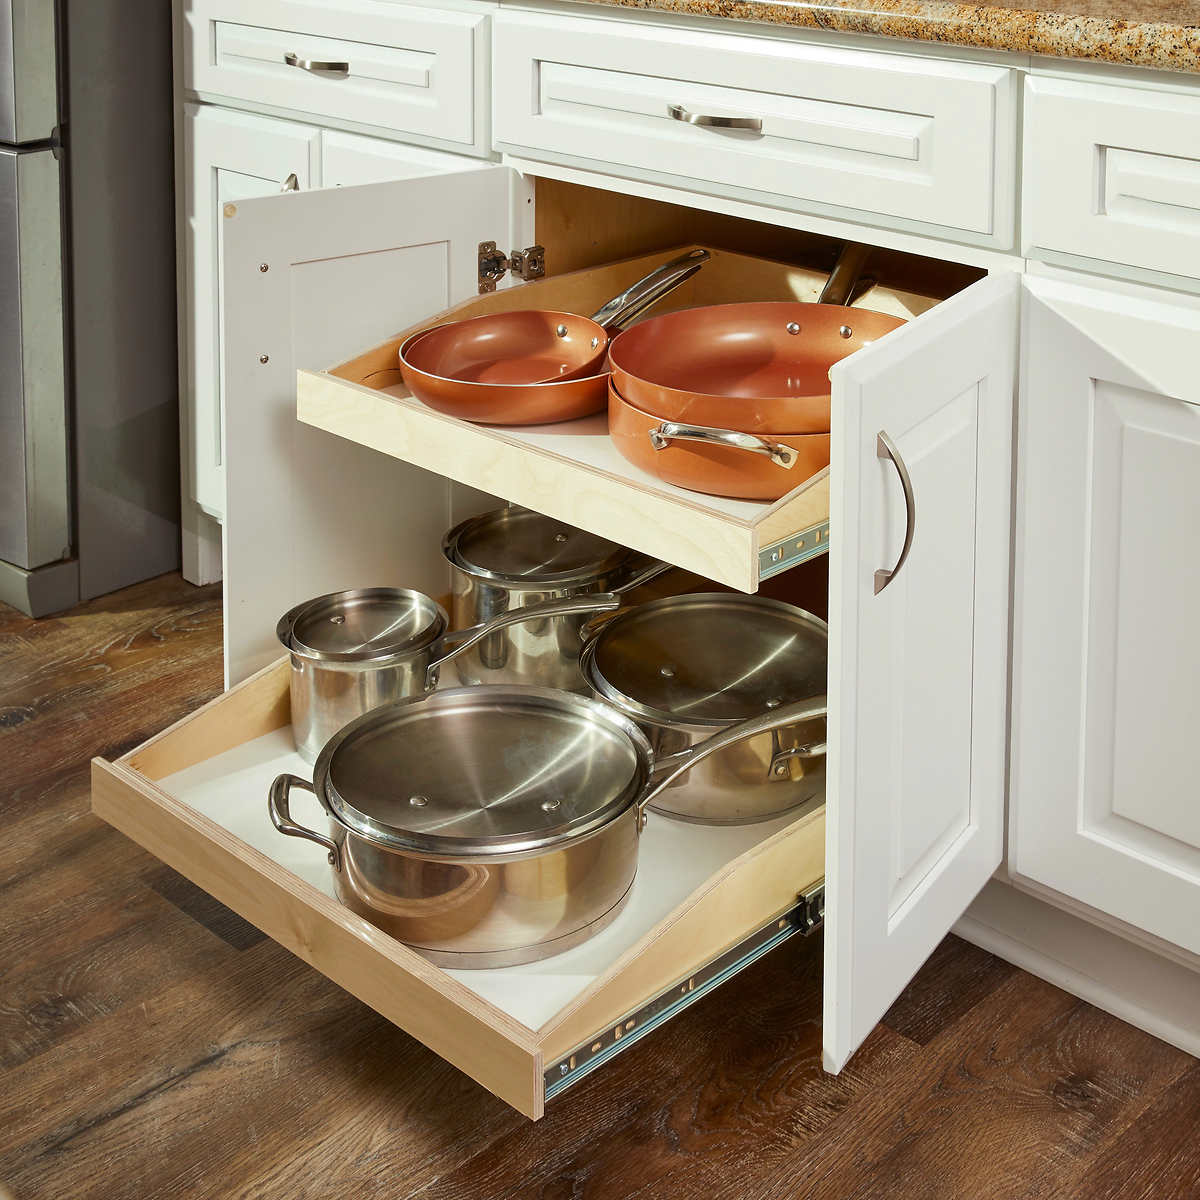 Made To Fit Slide Out Shelves For Existing Cabinets By Slide A Shelf